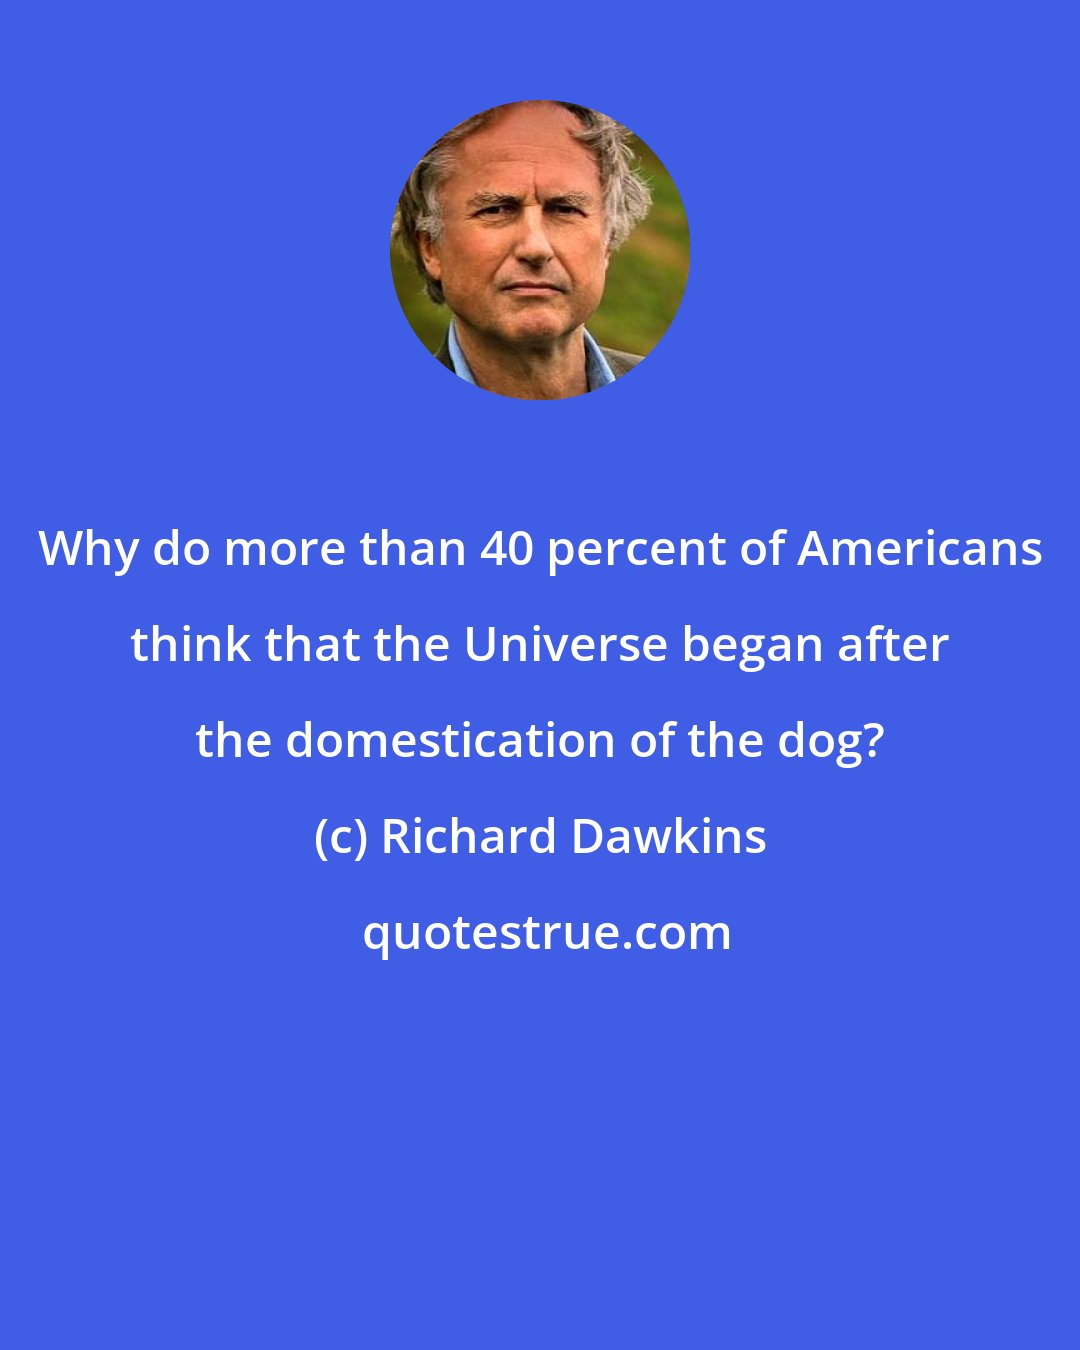 Richard Dawkins: Why do more than 40 percent of Americans think that the Universe began after the domestication of the dog?